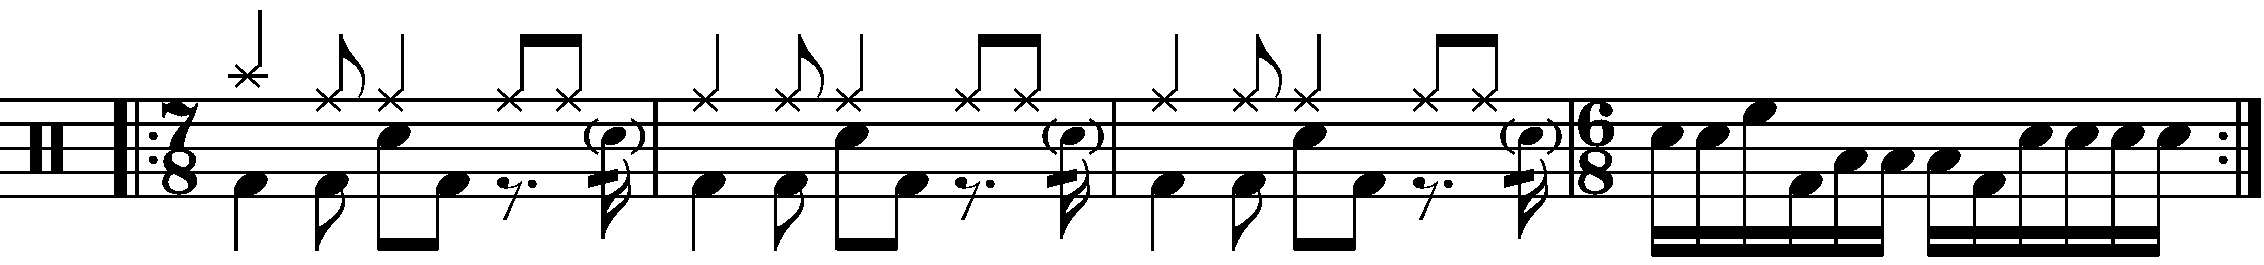 A four bar phrase using compound 7/8 and 6/8